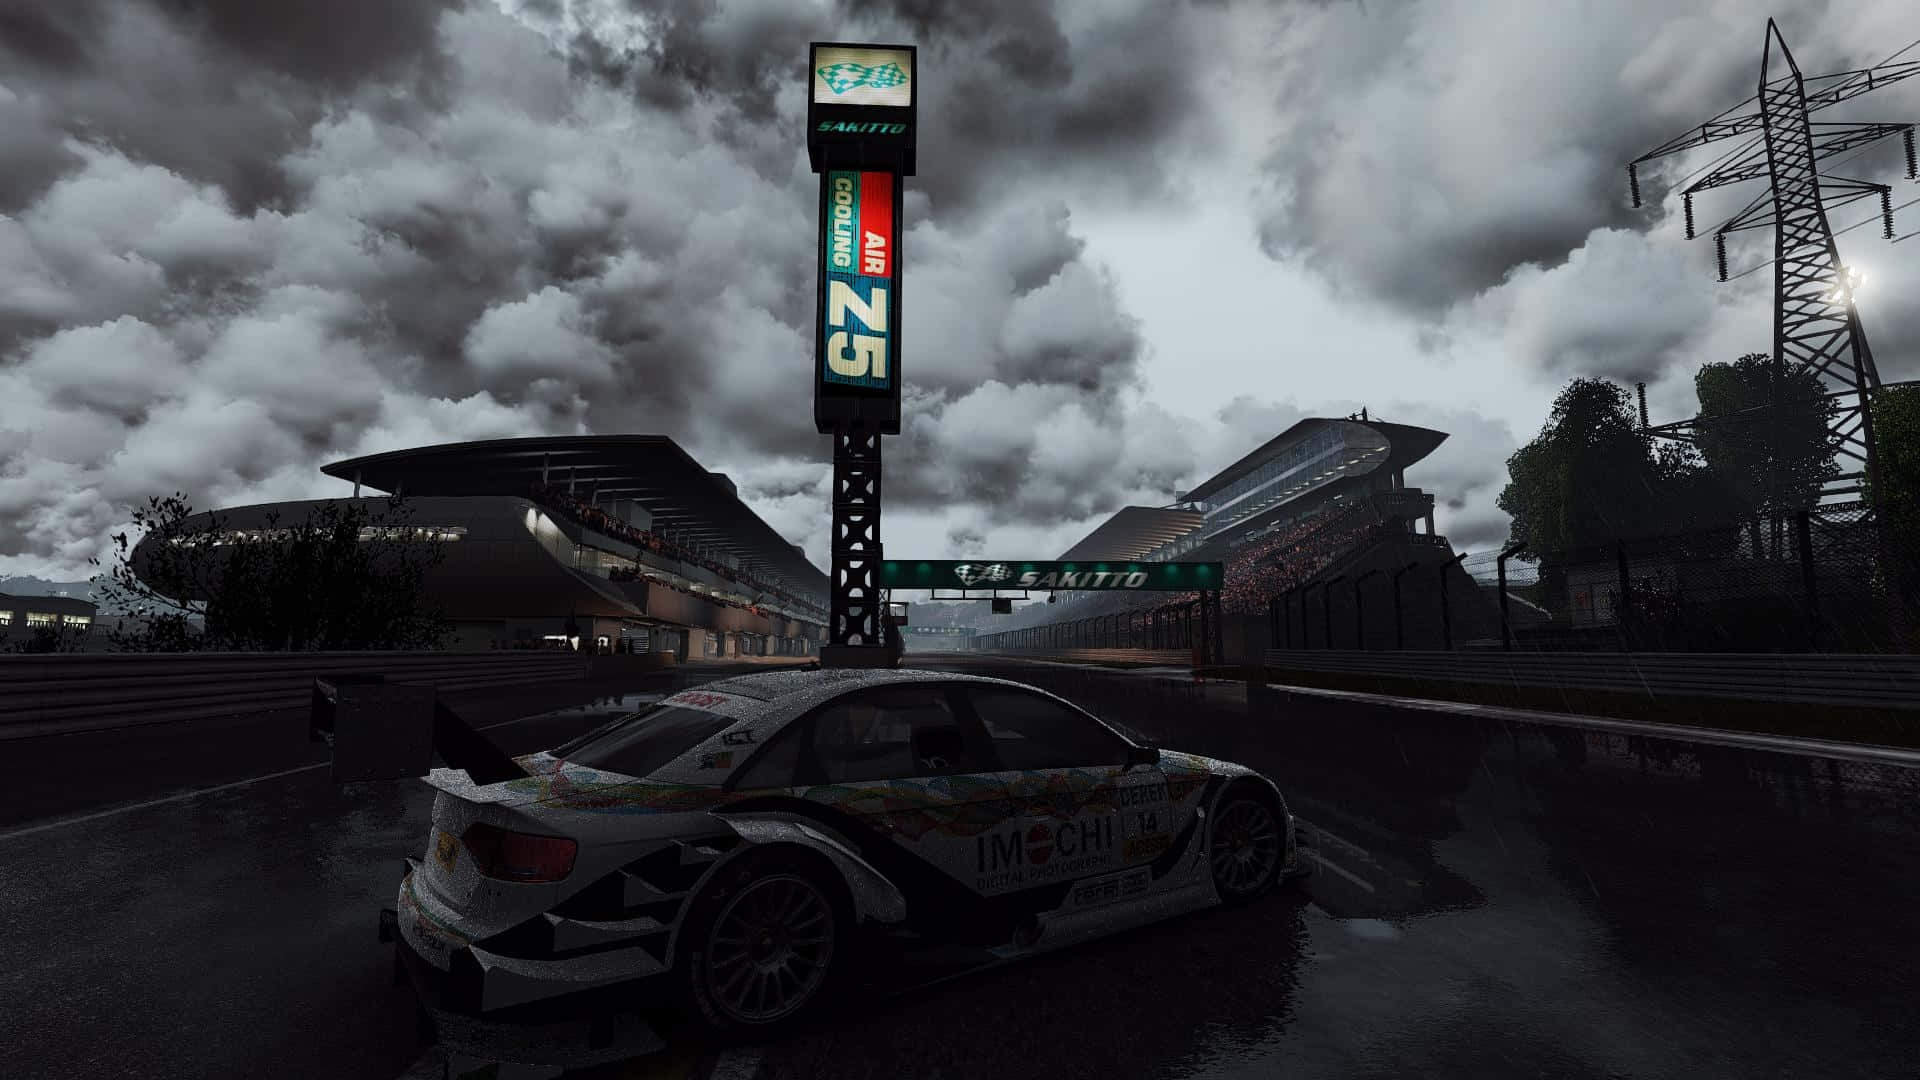 Spectacular 1920x1080 Project Cars Displaying High-speed Adrenaline